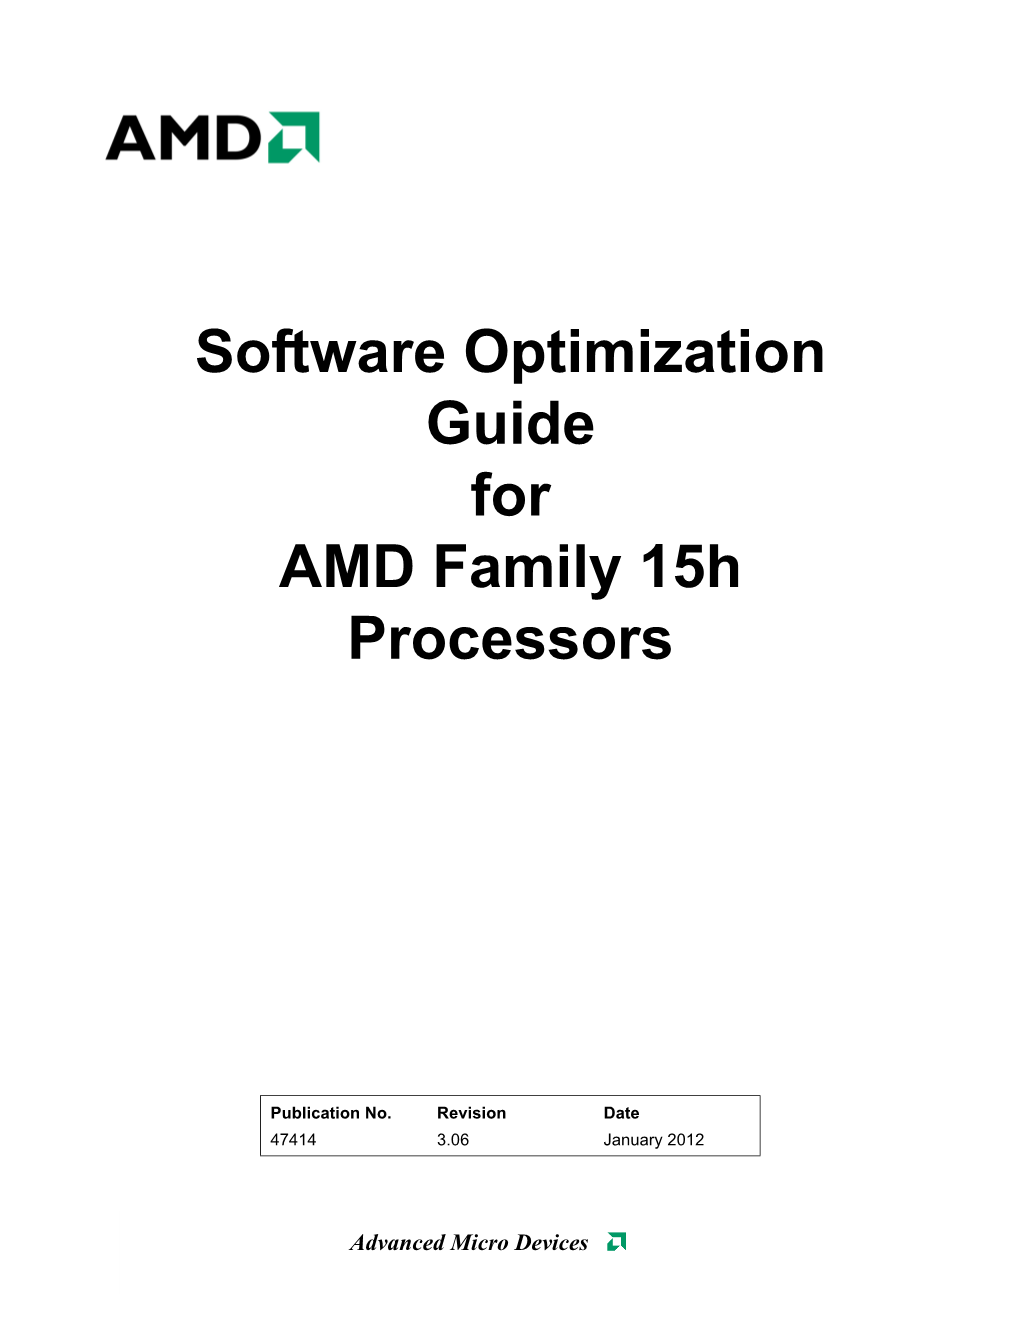 Software Optimization Guide for Amd Family 15H Processors (.Pdf)